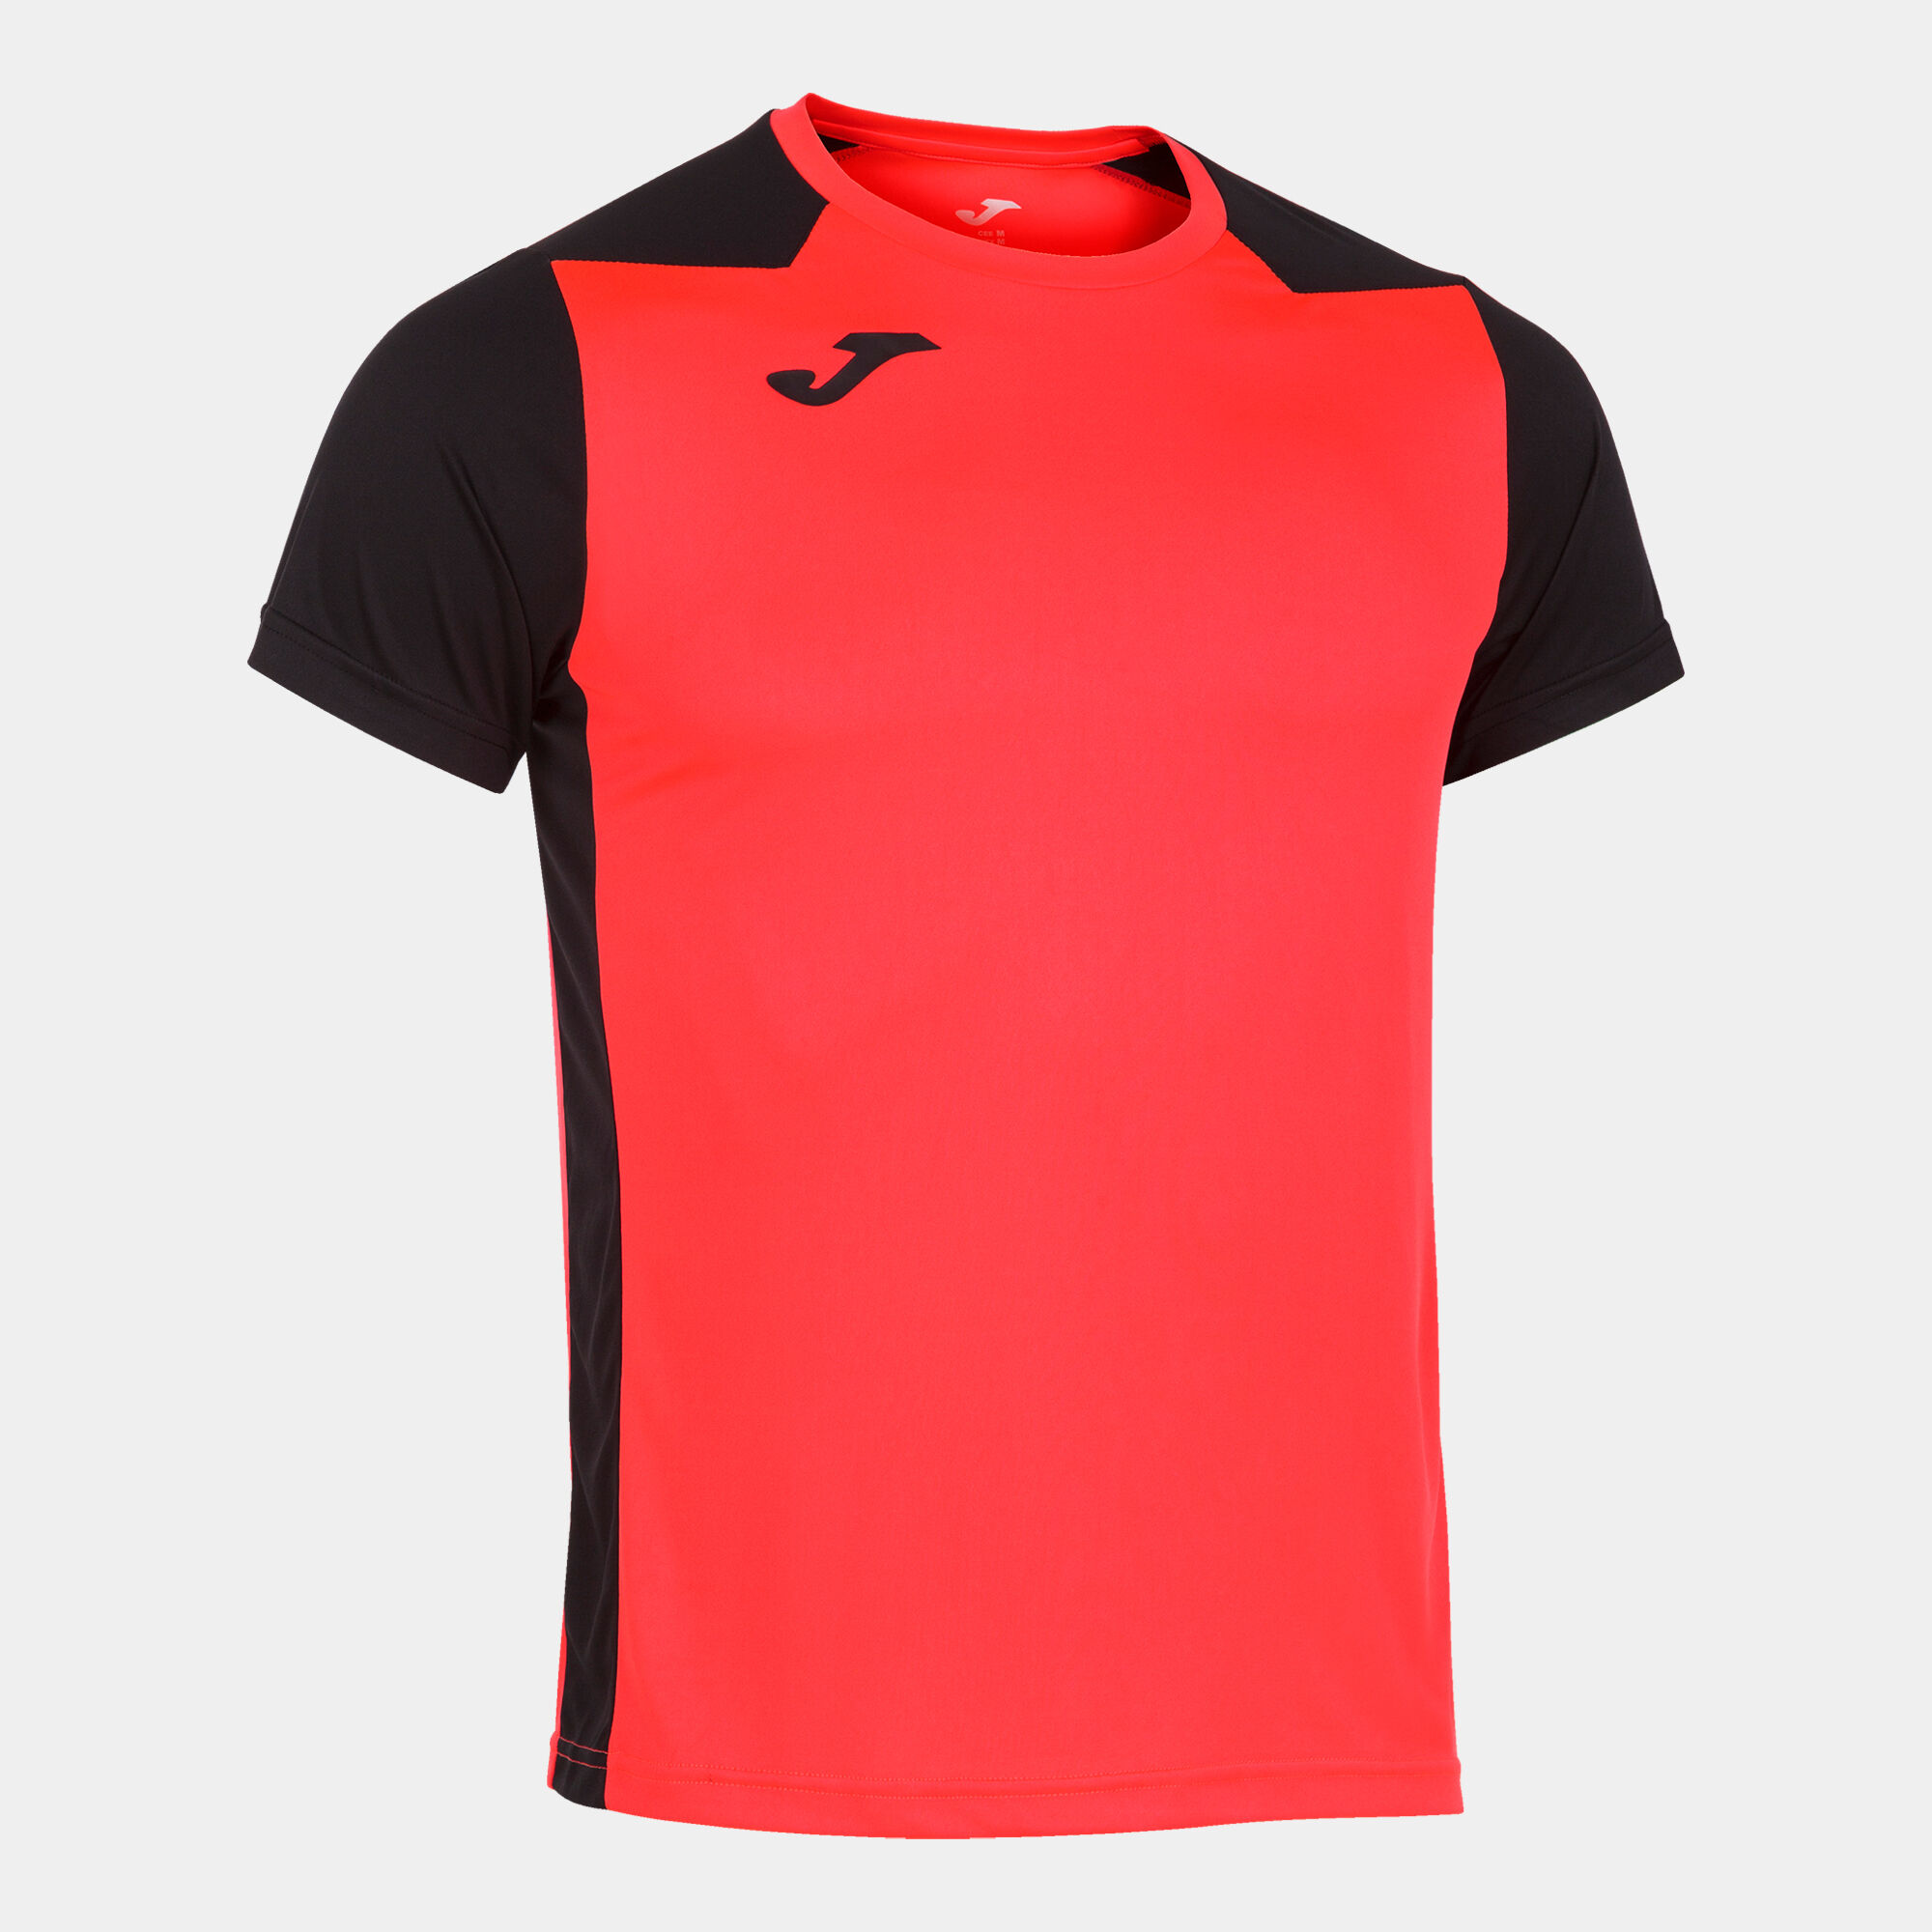 MAILLOT MANCHES COURTES HOMME RECORD II CORAIL FLUO NOIR